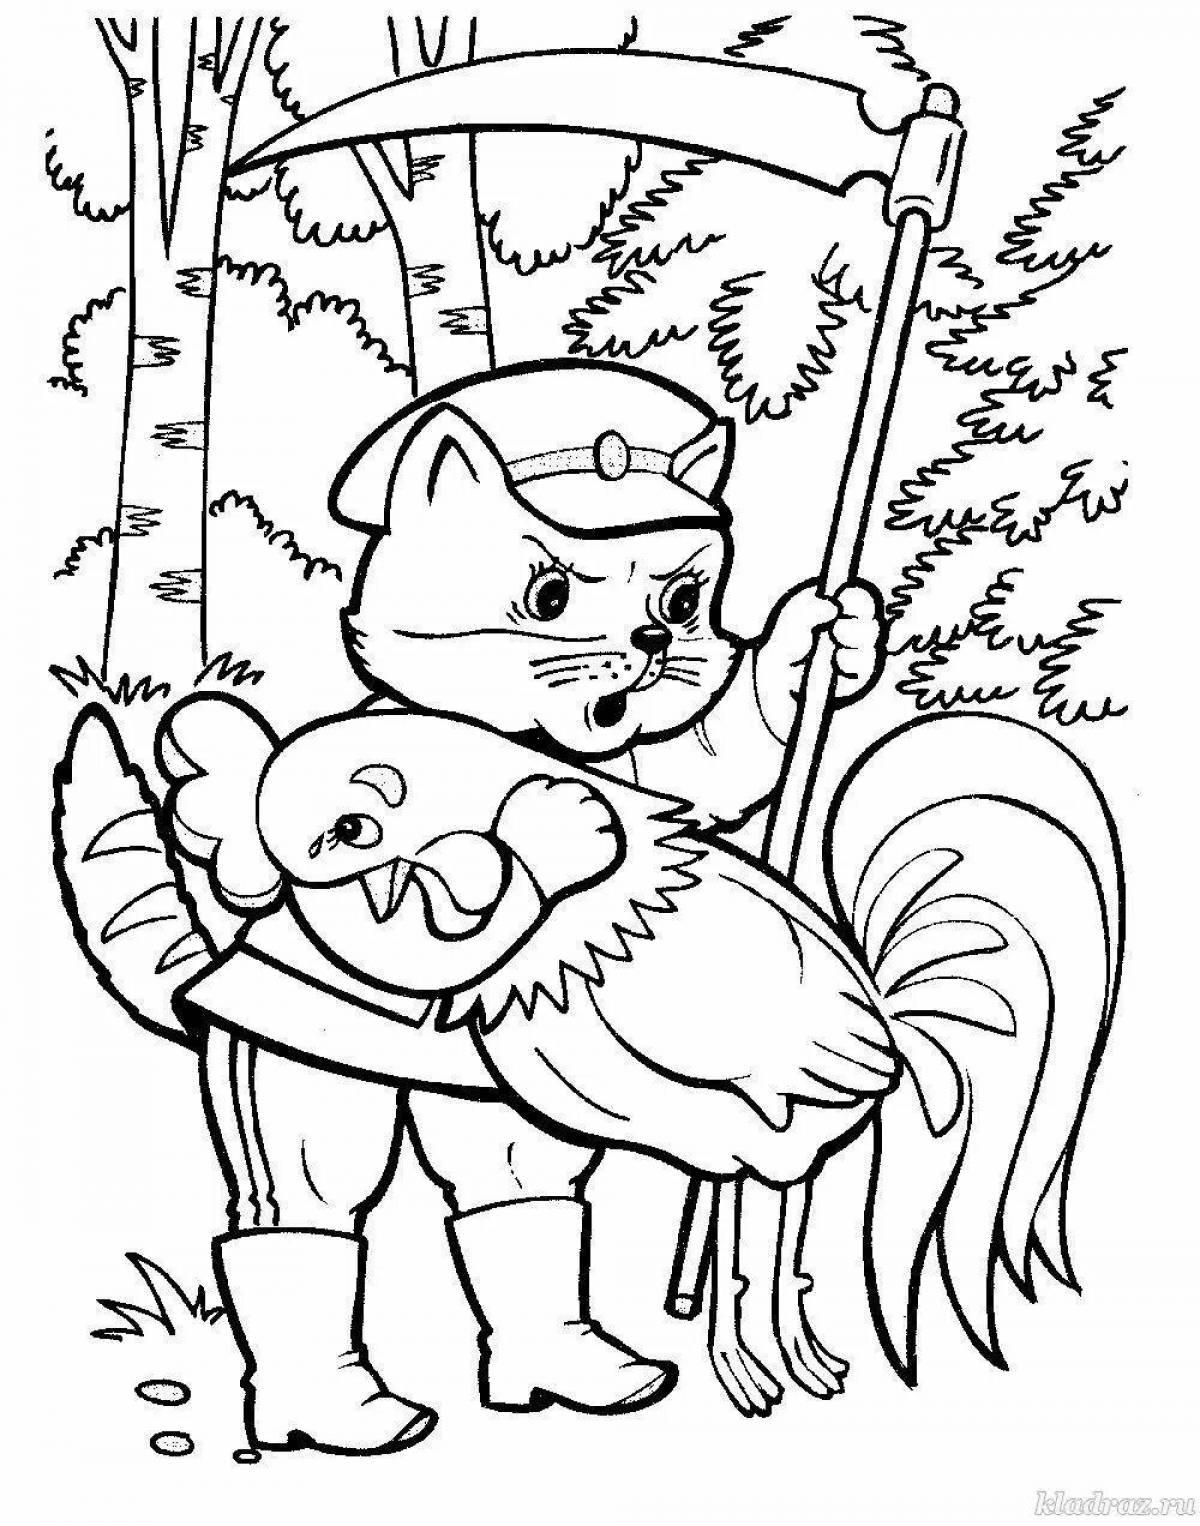 Coloring book bright cat and fox